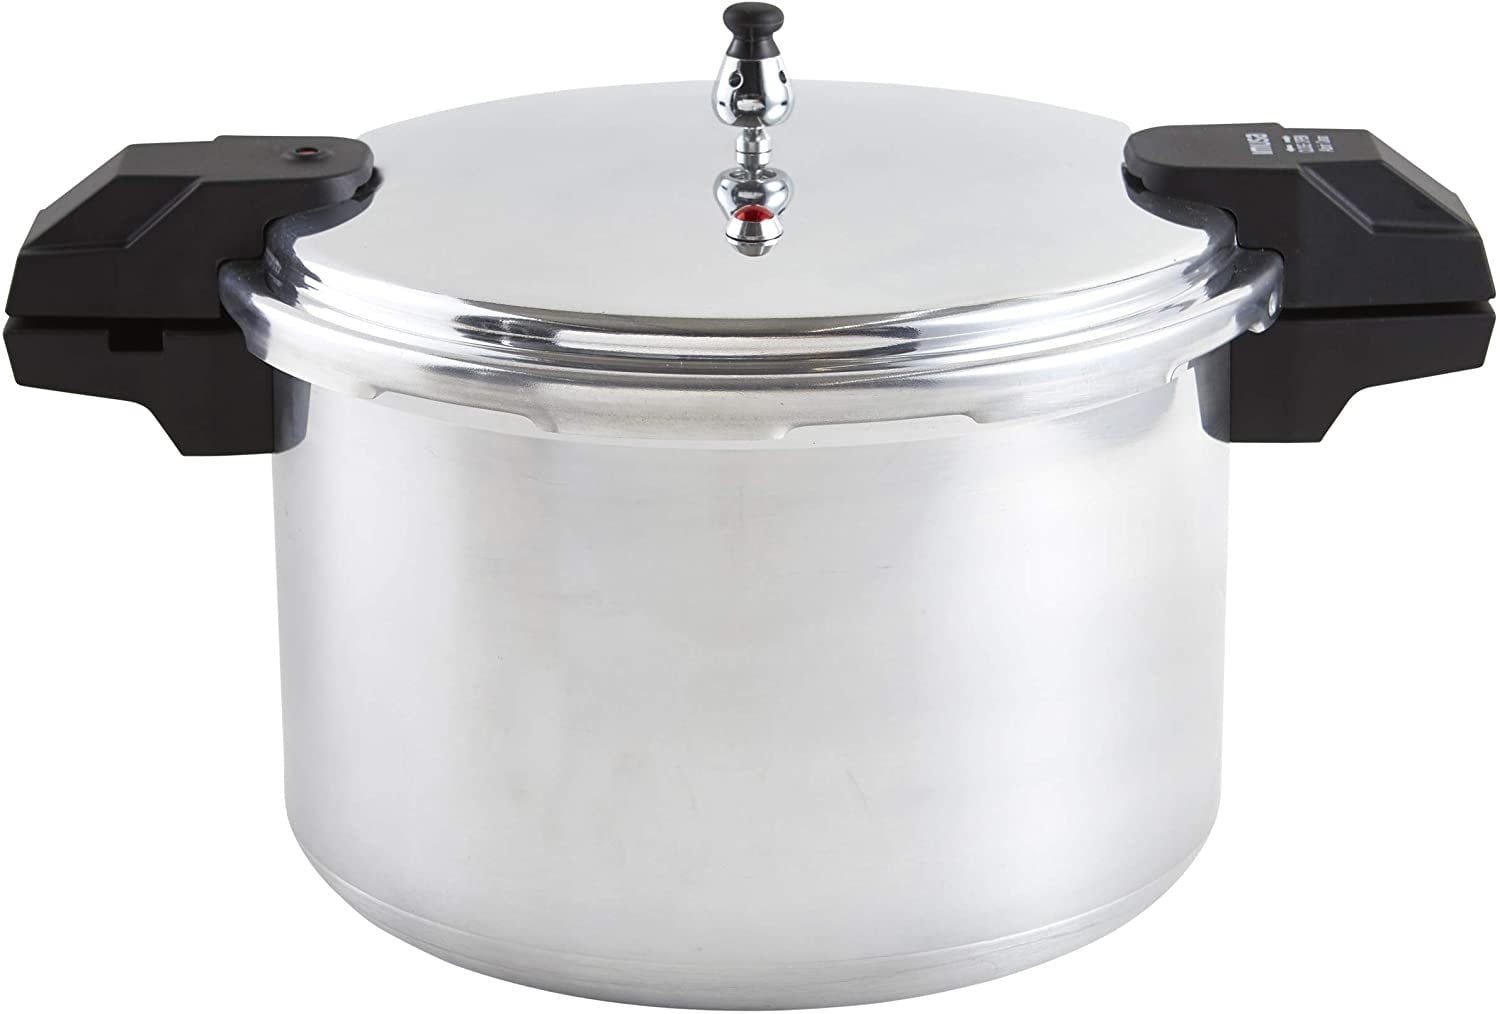 IMUSA USA 16Qt Jumbo Stovetop Pressure Cooker with Regulator and Side  Handles, 16 Quart, Silver 